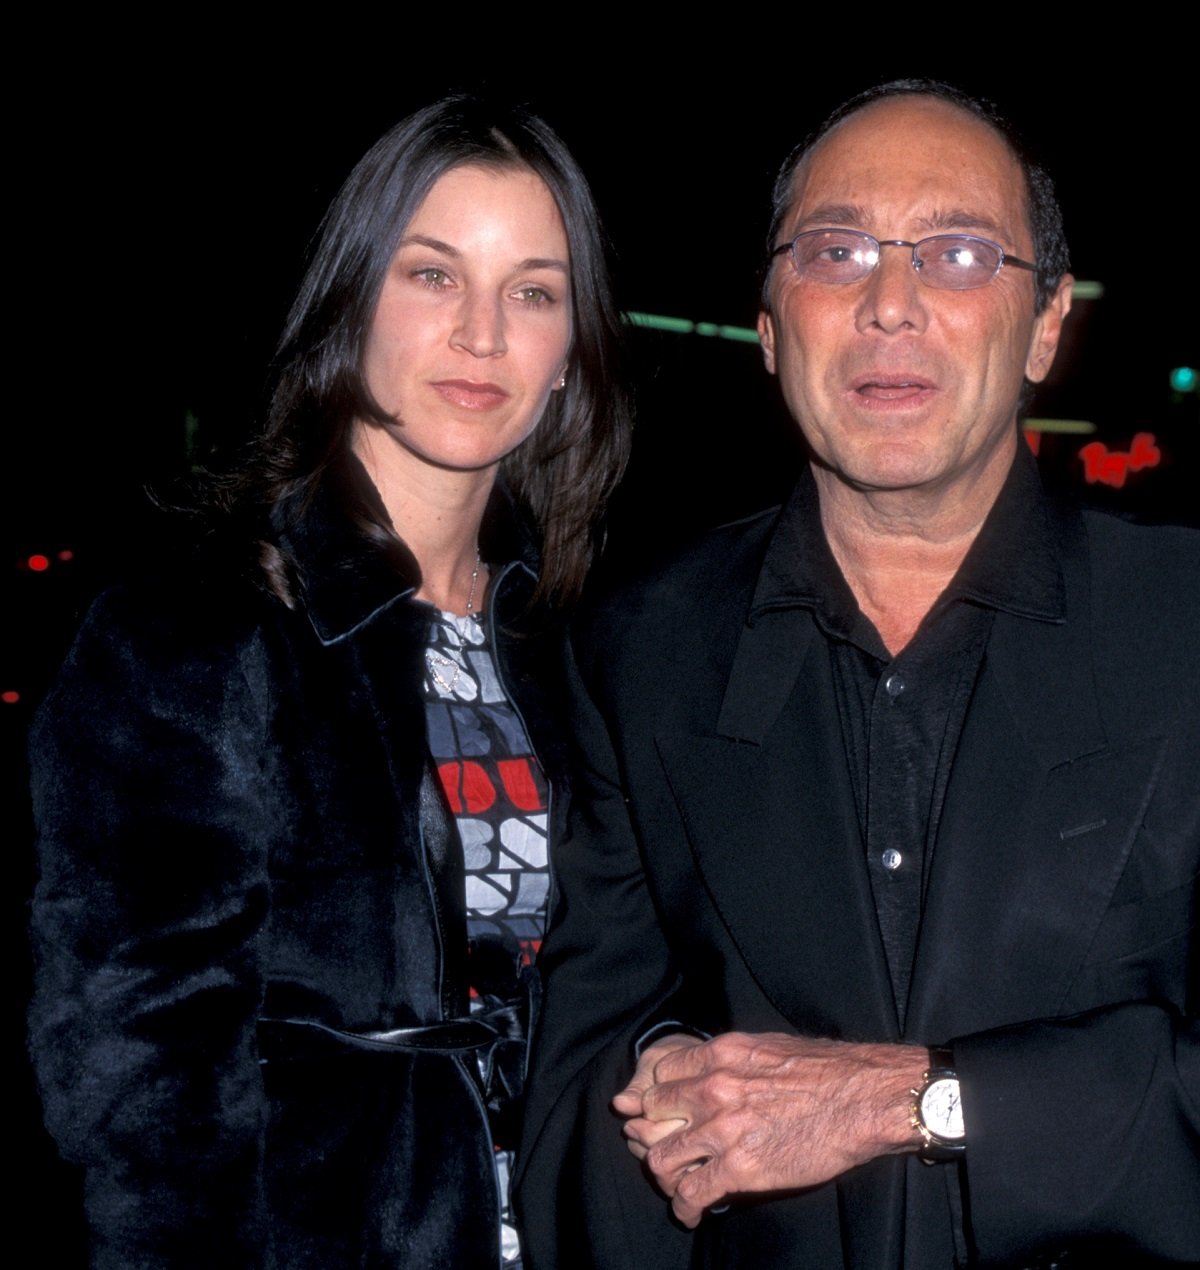 Paul Anka and his daughter, Amanda Anka, attending a movie premiere together